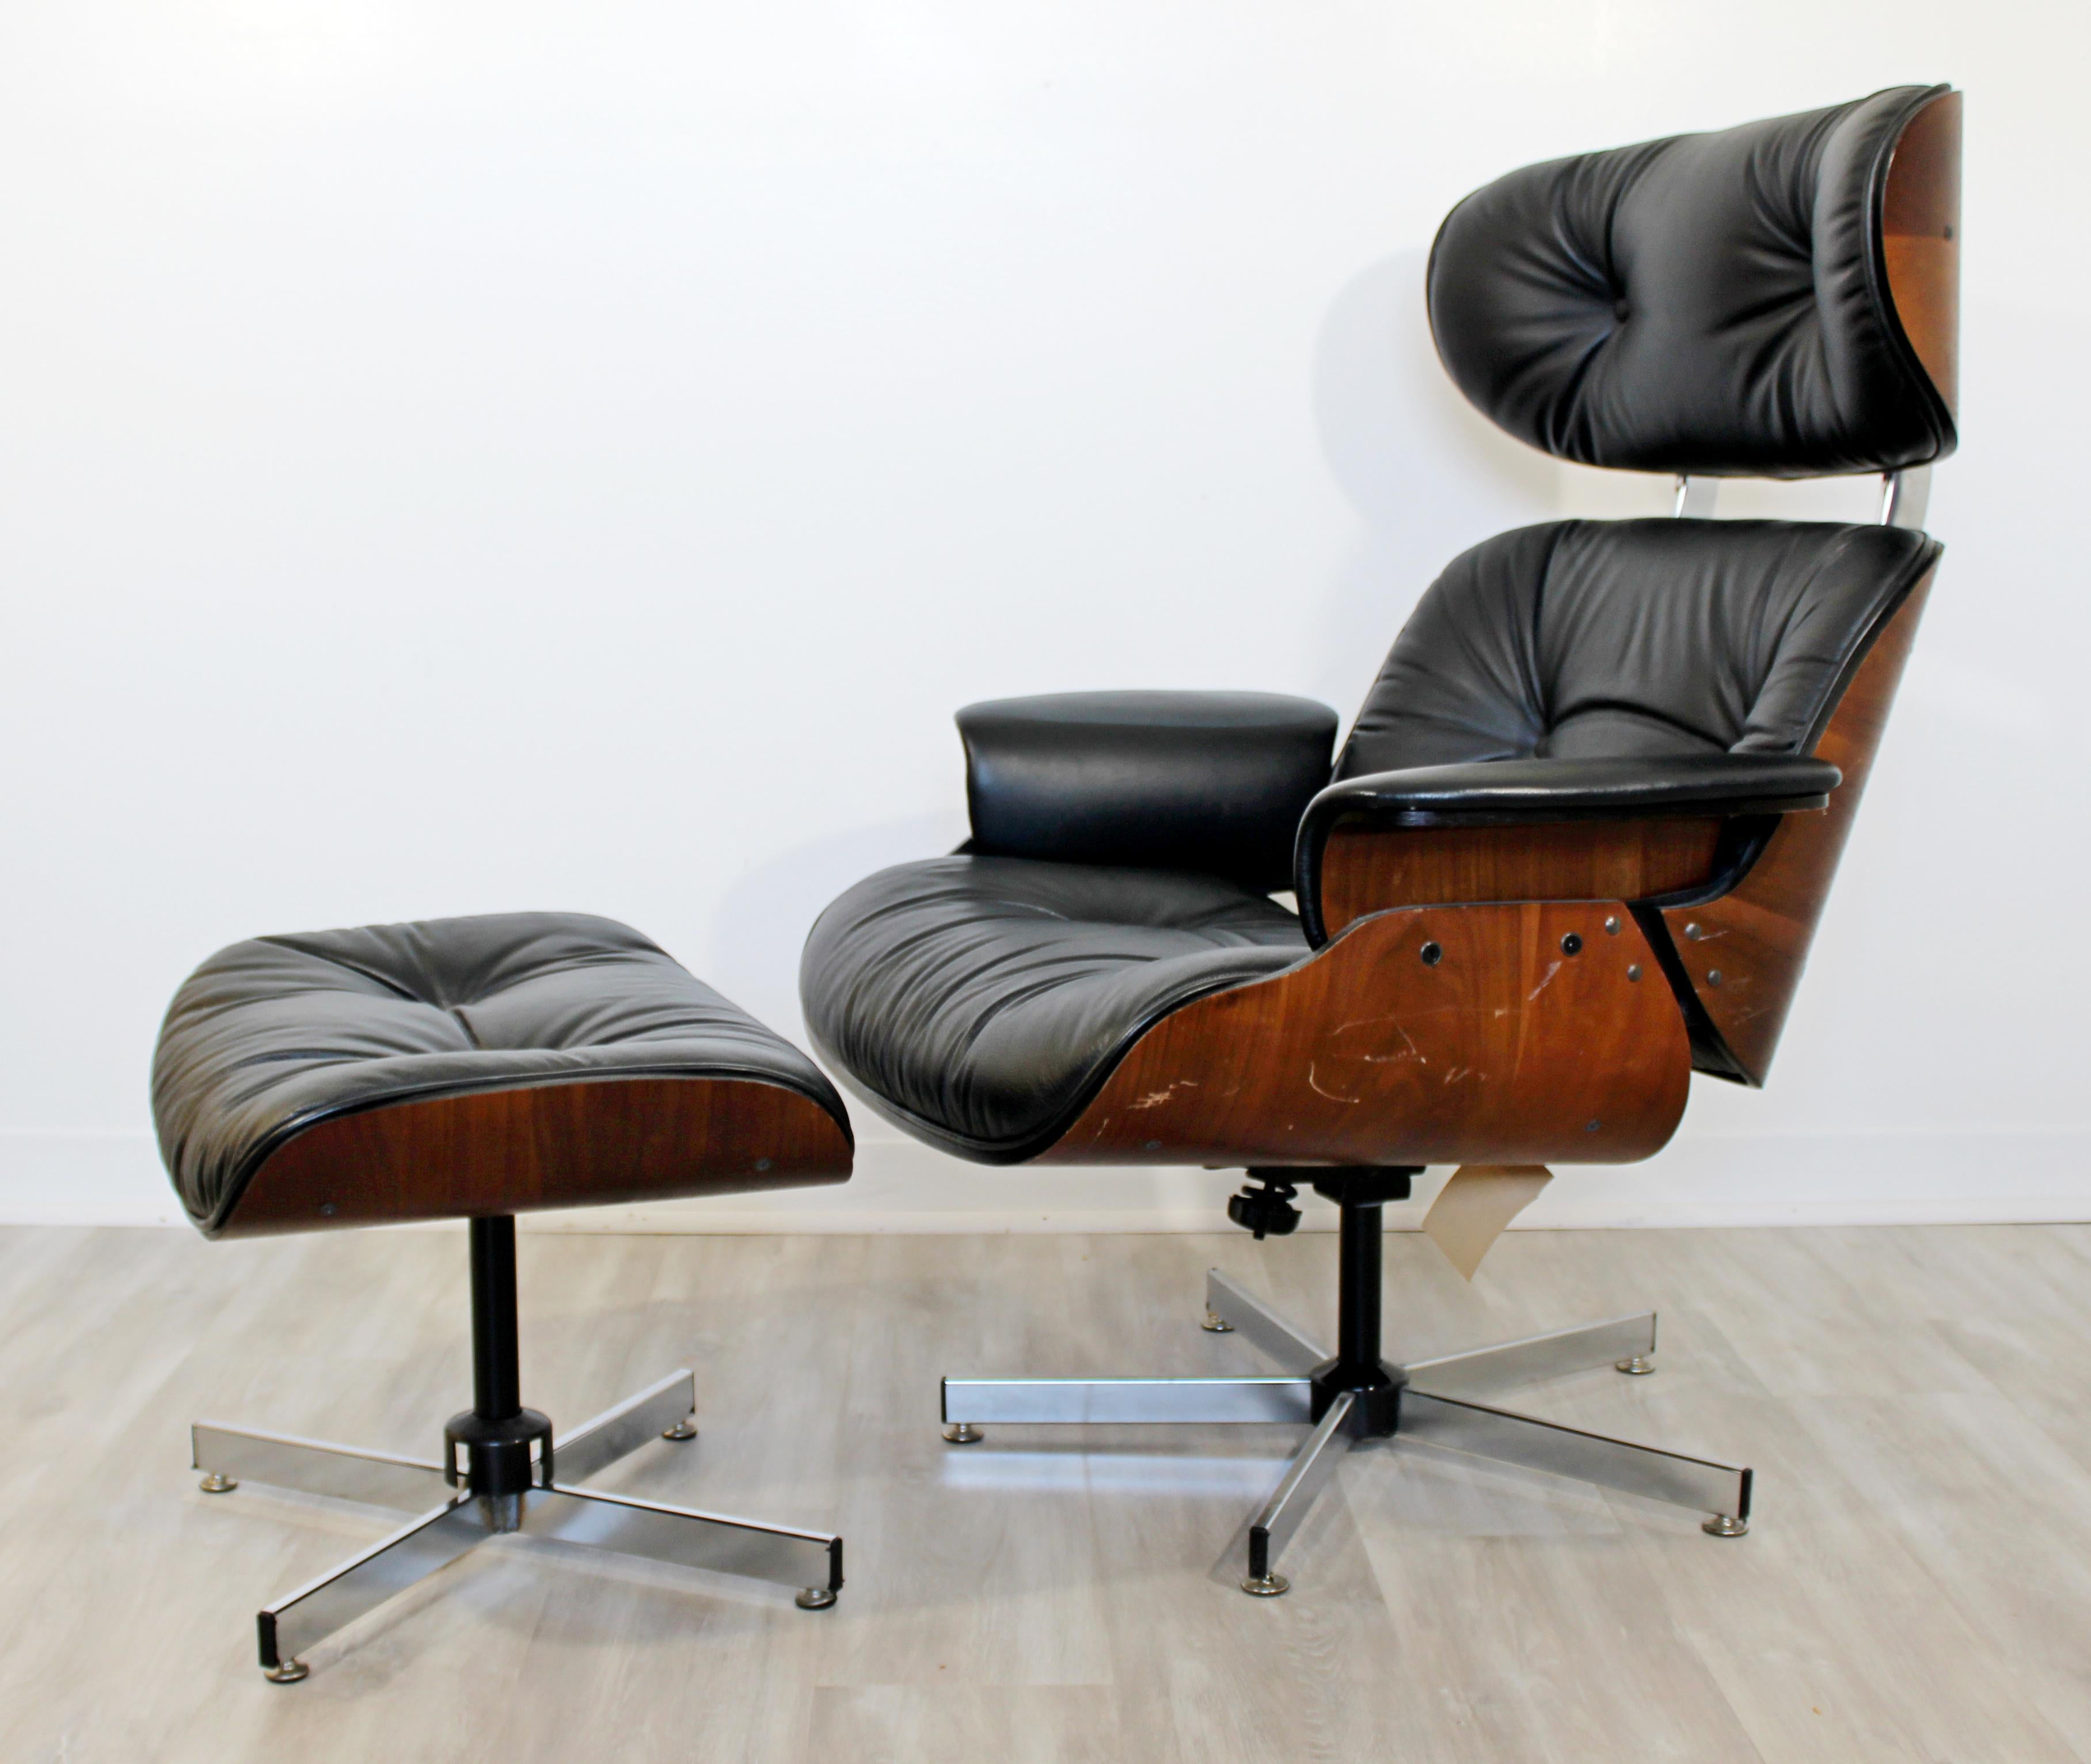 For your consideration is a beautiful lounge armchair and ottoman, with black leather upholstery, by Plycraft, circa the 1960s, in the style of Eames for Herman Miller. In good vintage condition. The dimensions of the chair are 32